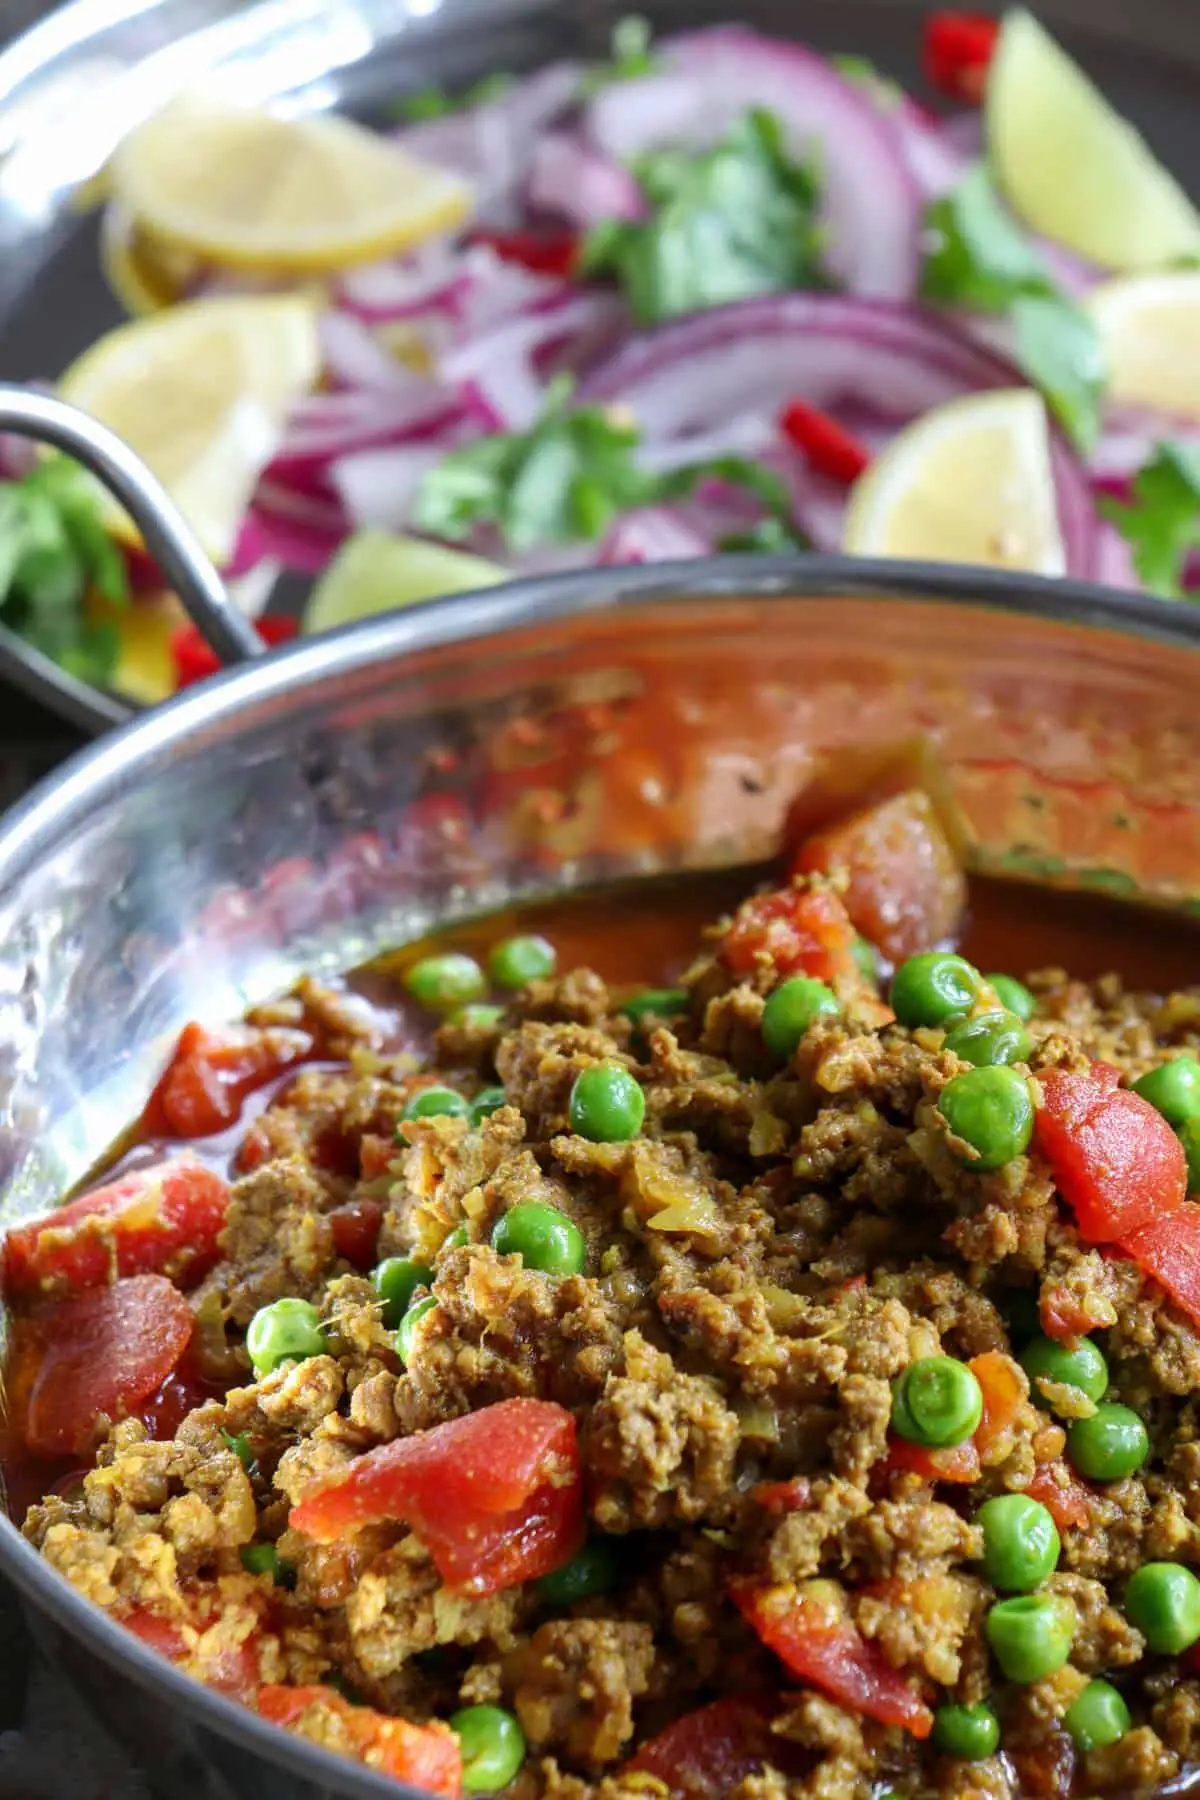 Lamb mince, peas, onion, and diced tomatoes in a rich sauce in a silver balti bowl, with a salad in the background consisting of sliced red onion, wedges of lemons and limes, sliced chilies and cilantro on a silver plate.